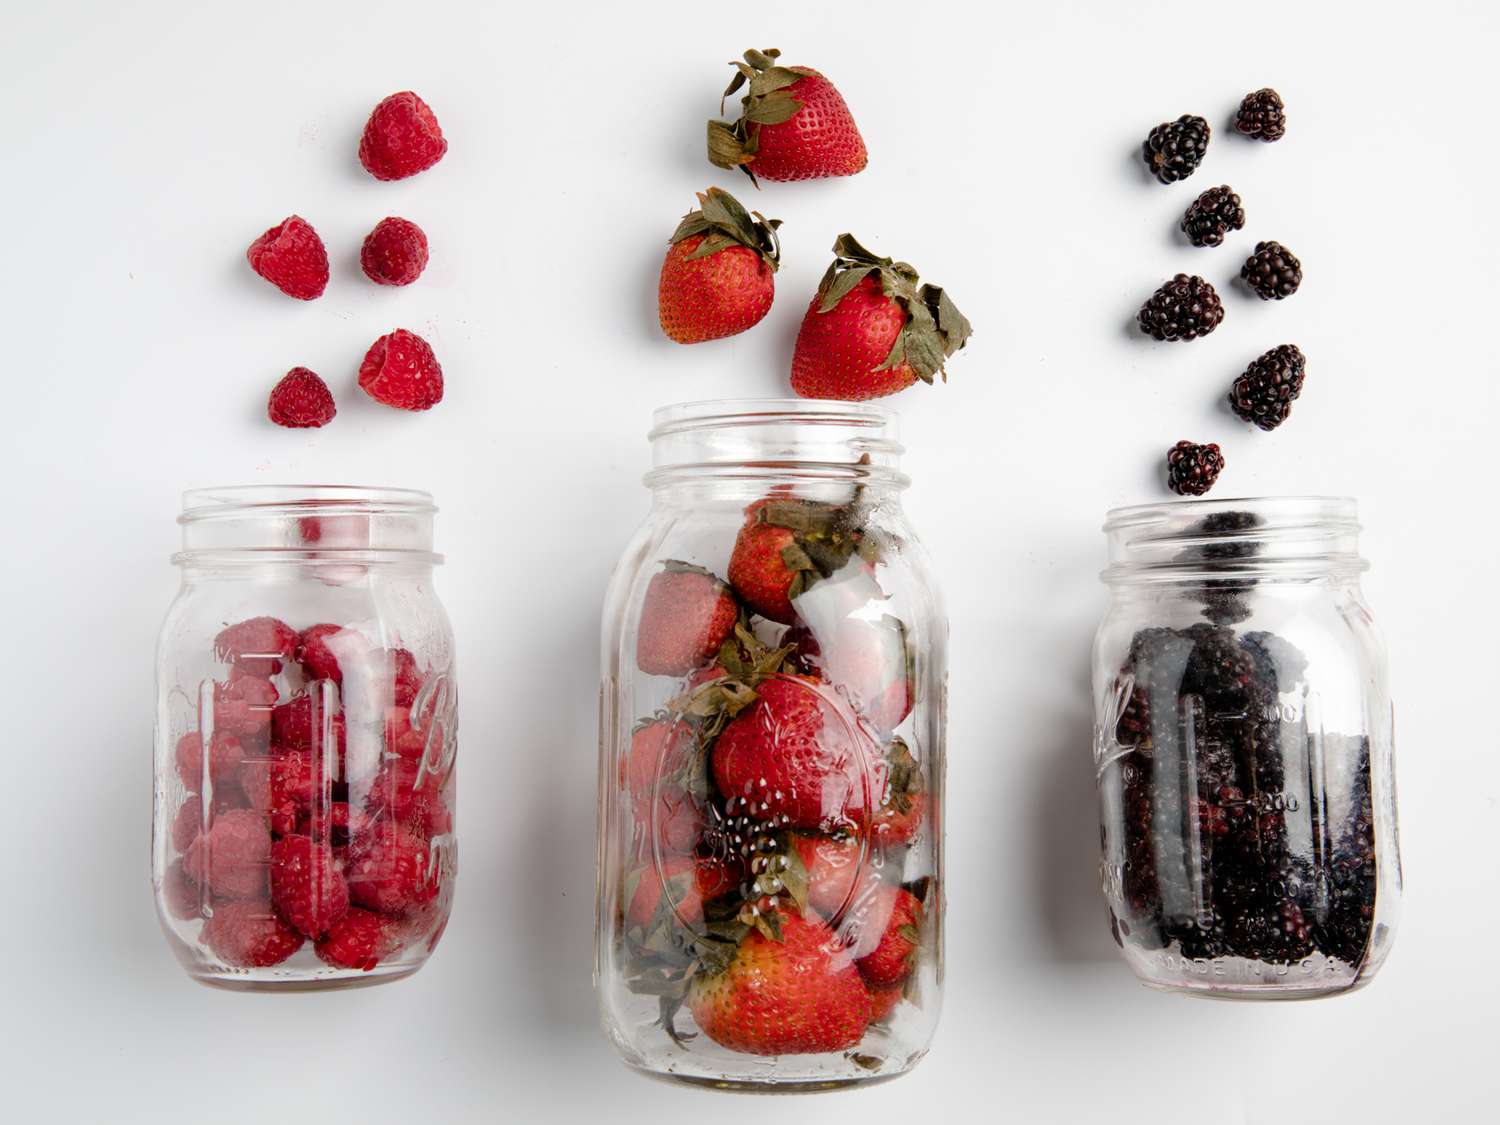 How To Store Berries In Mason Jars